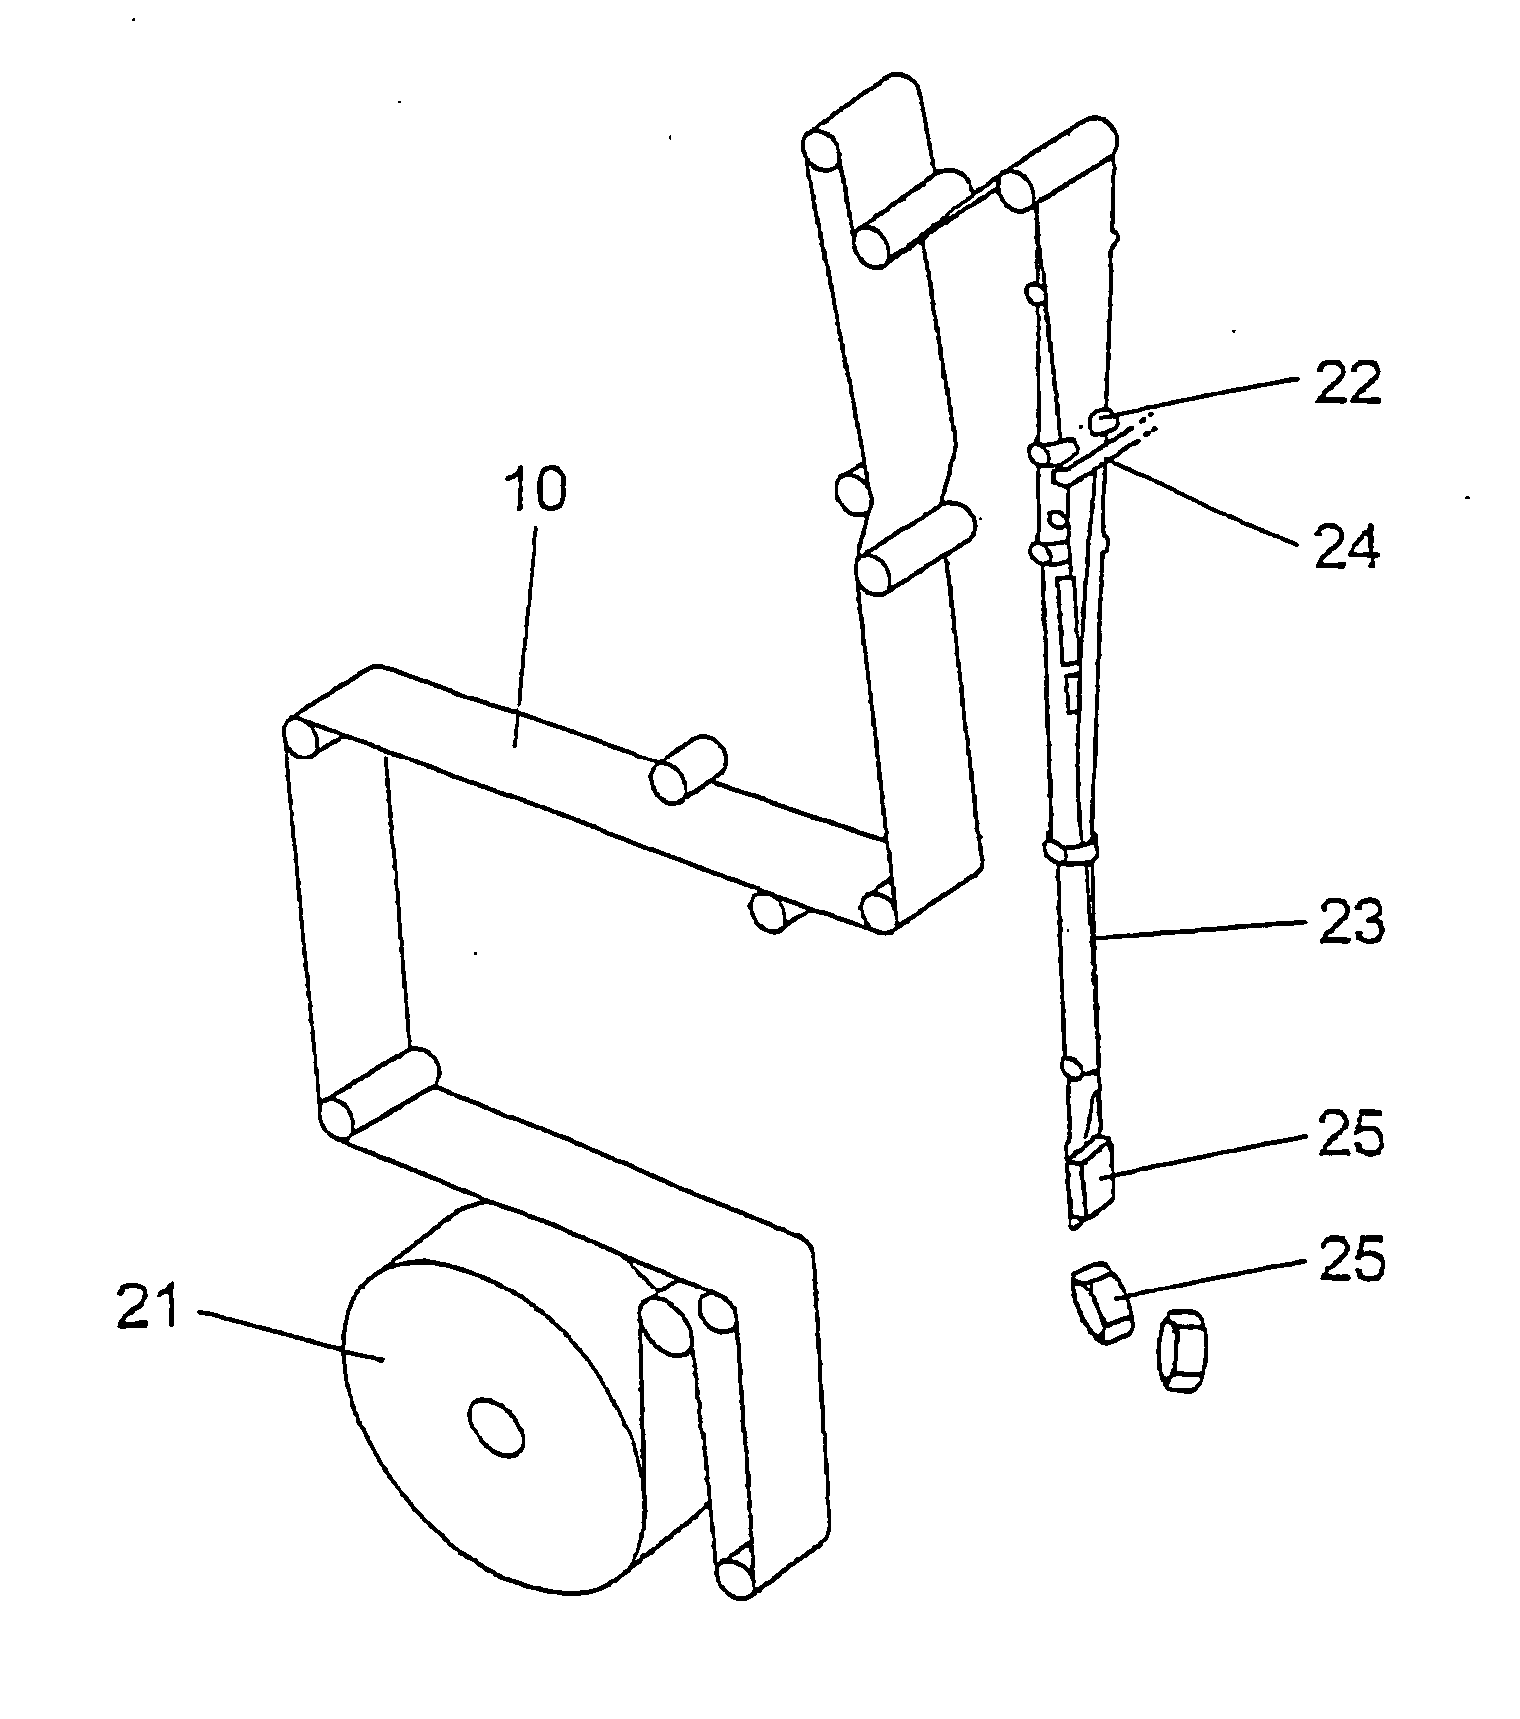 Packaging laminate, method of producing a packaging container and the packaging container